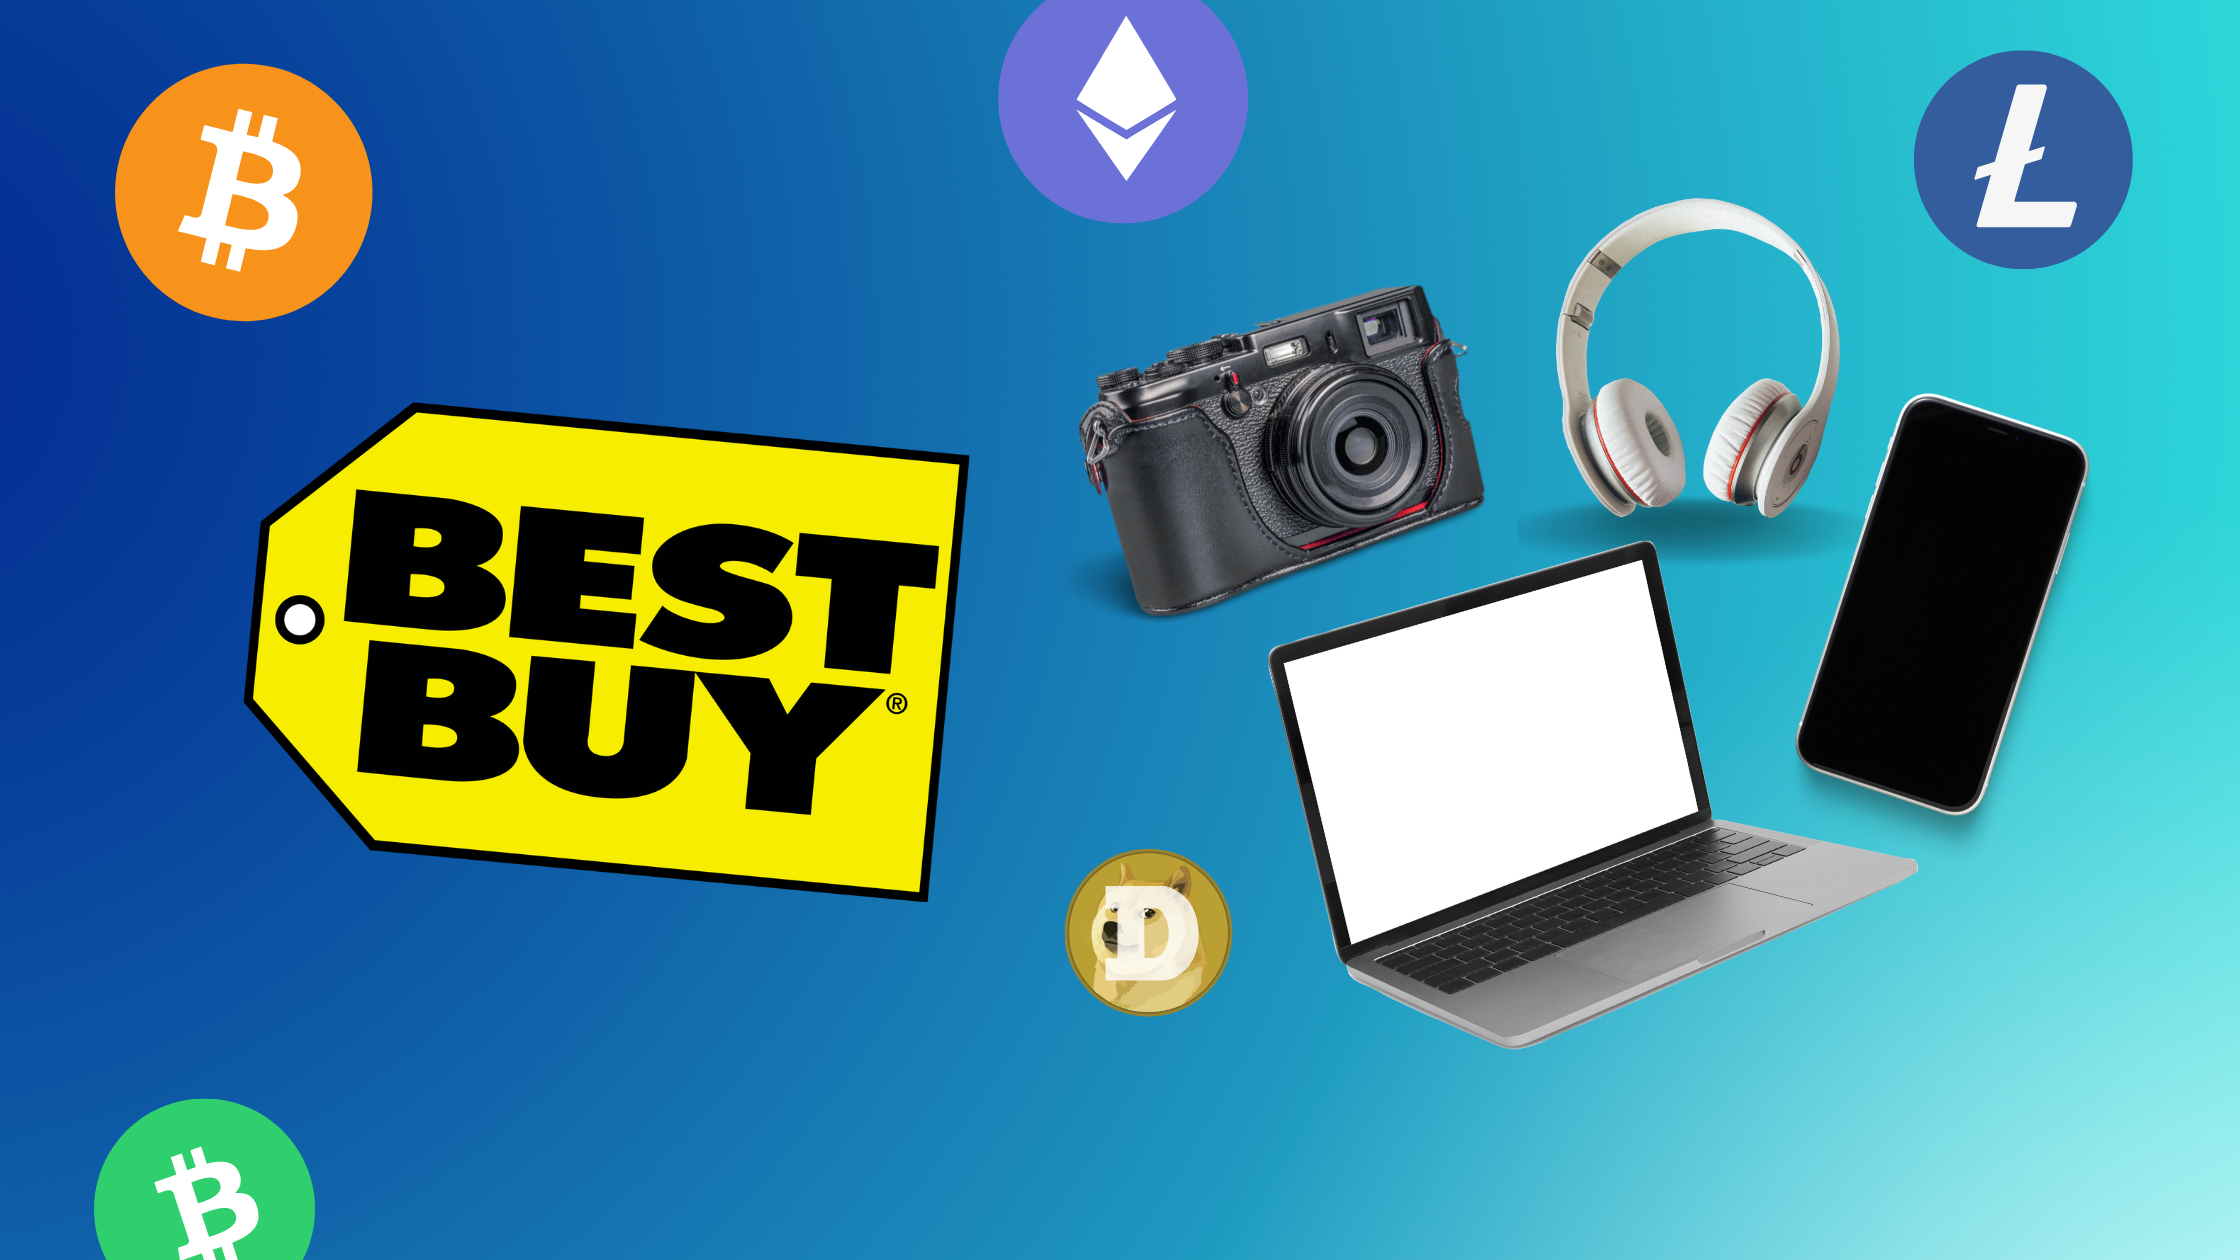 How to Use Crypto at Best Buy